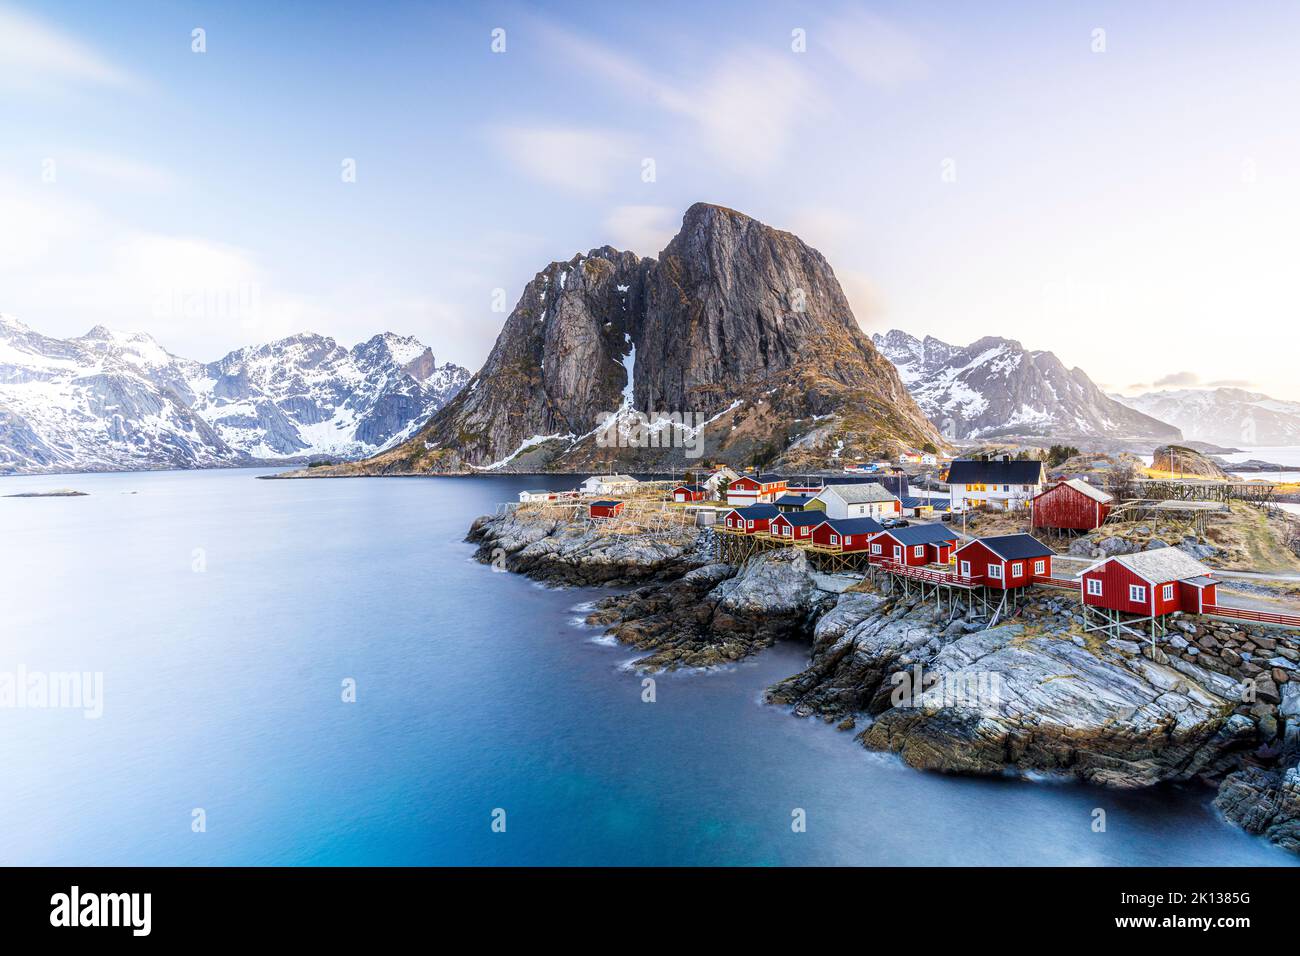 High angle view of traditional red Rorbu cabins in the fishing village of Hamnoy at dawn, Reine, Lofoten Islands, Norway, Europe Stock Photo